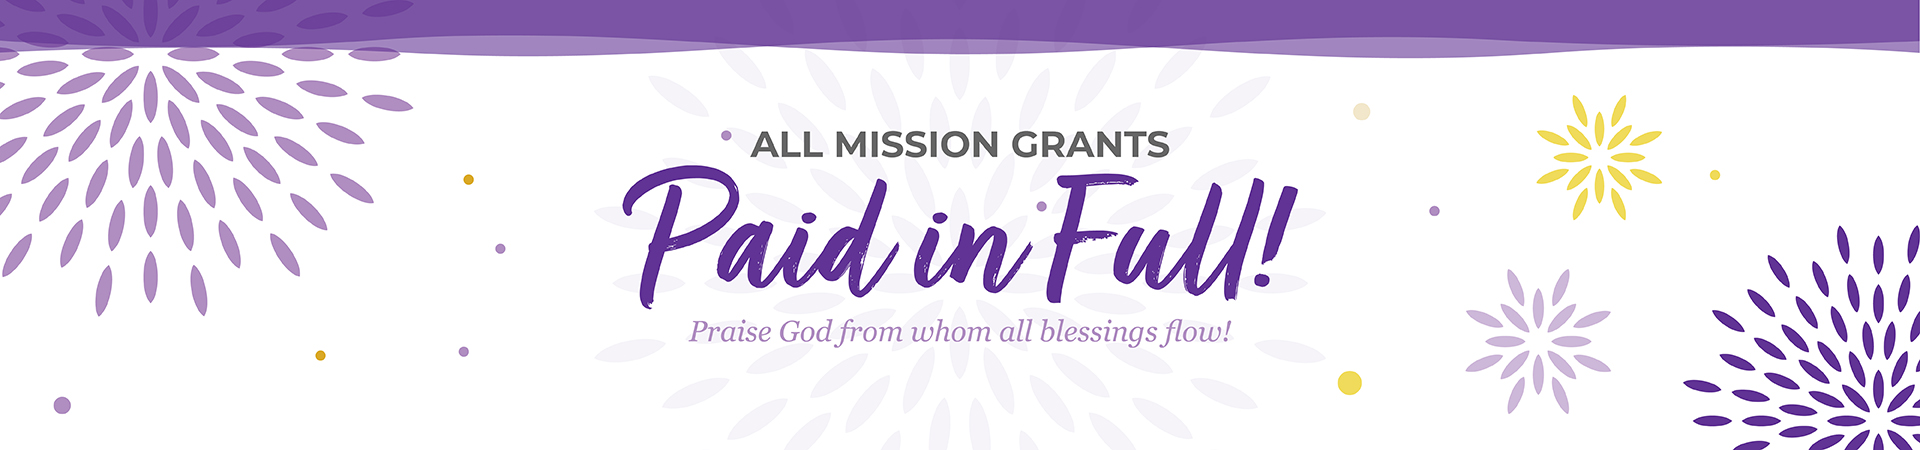 All mission grants paid in full! Praise God from whom all blessings flow!